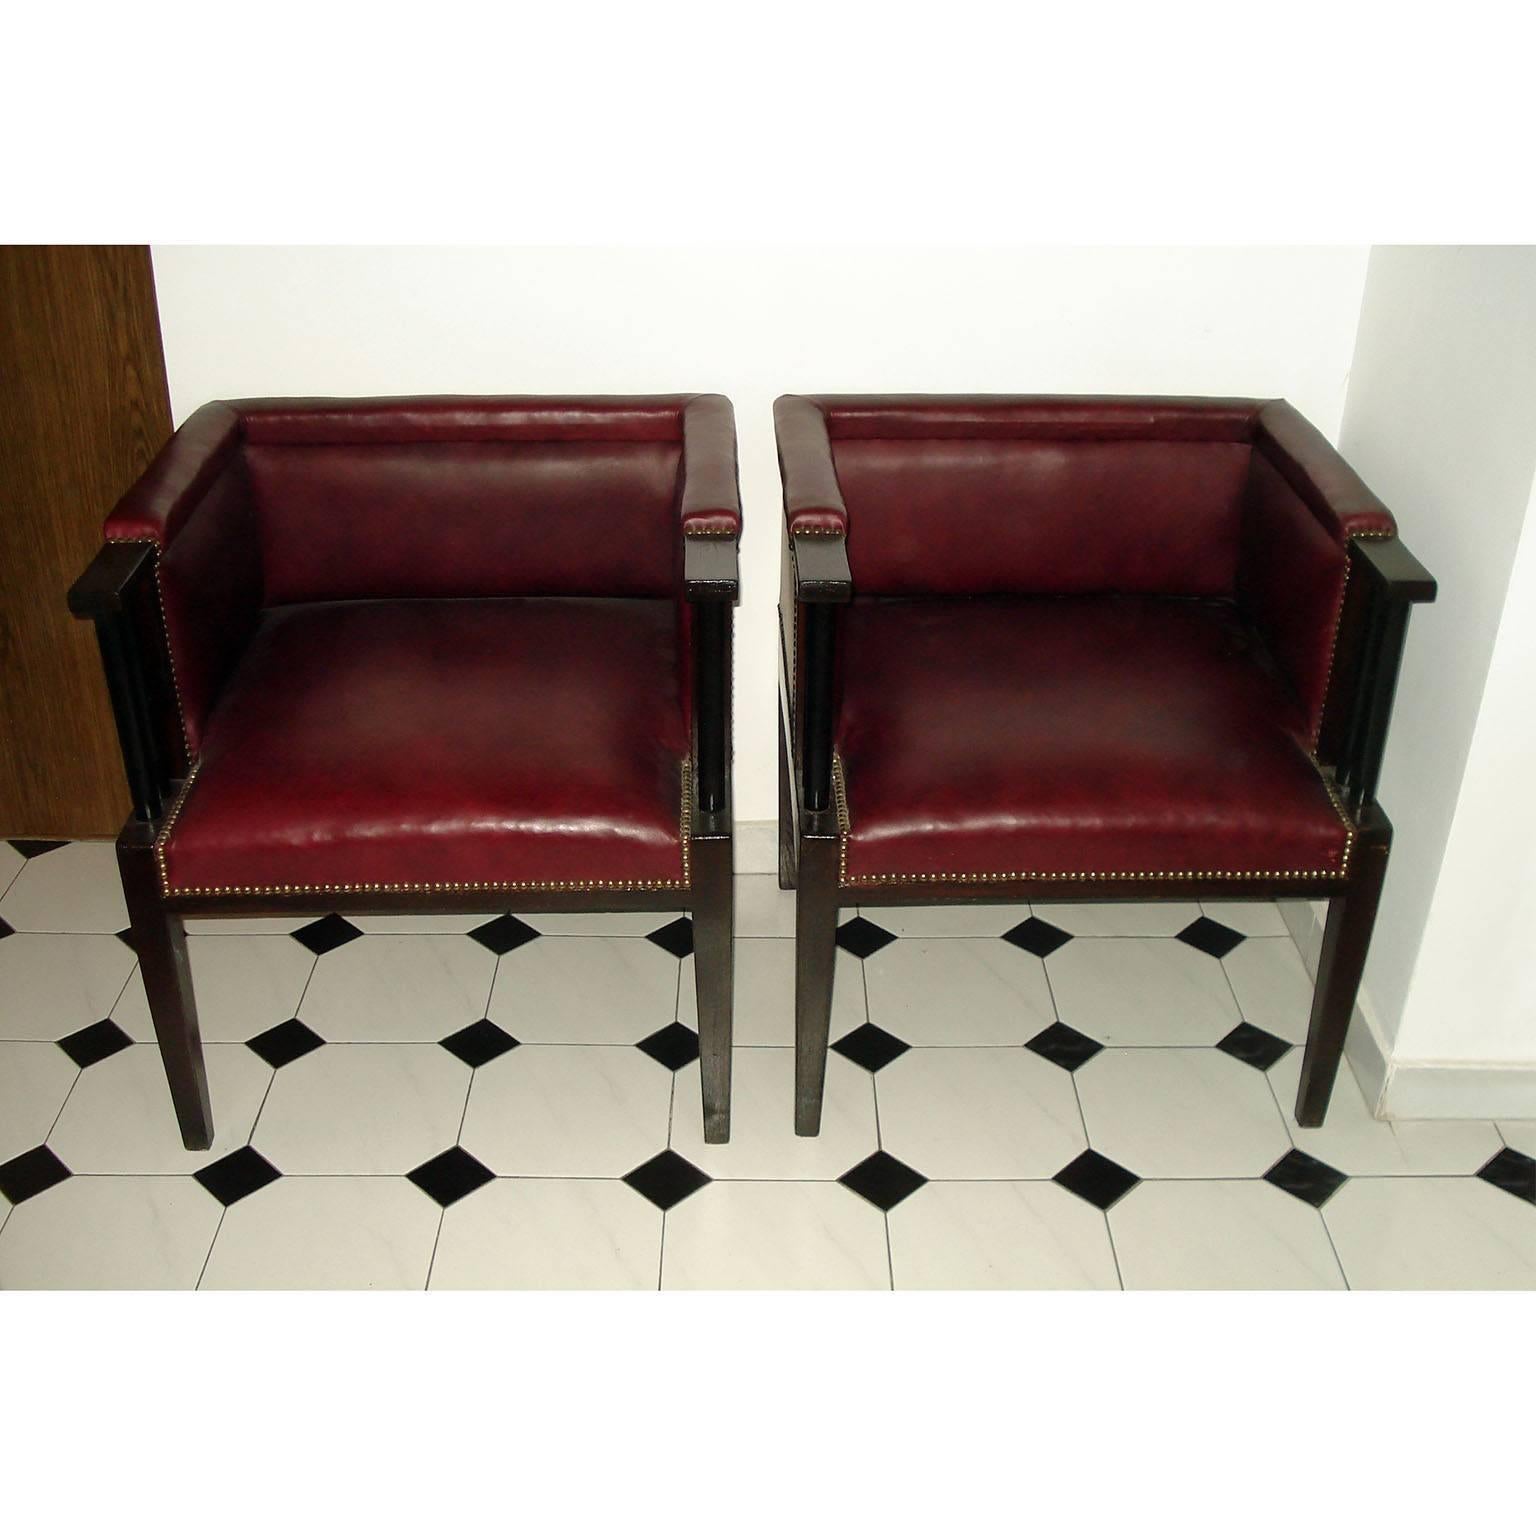 German Rare Pair of Constructivist Armchairs in the Style of Darmstadt Artists Colony